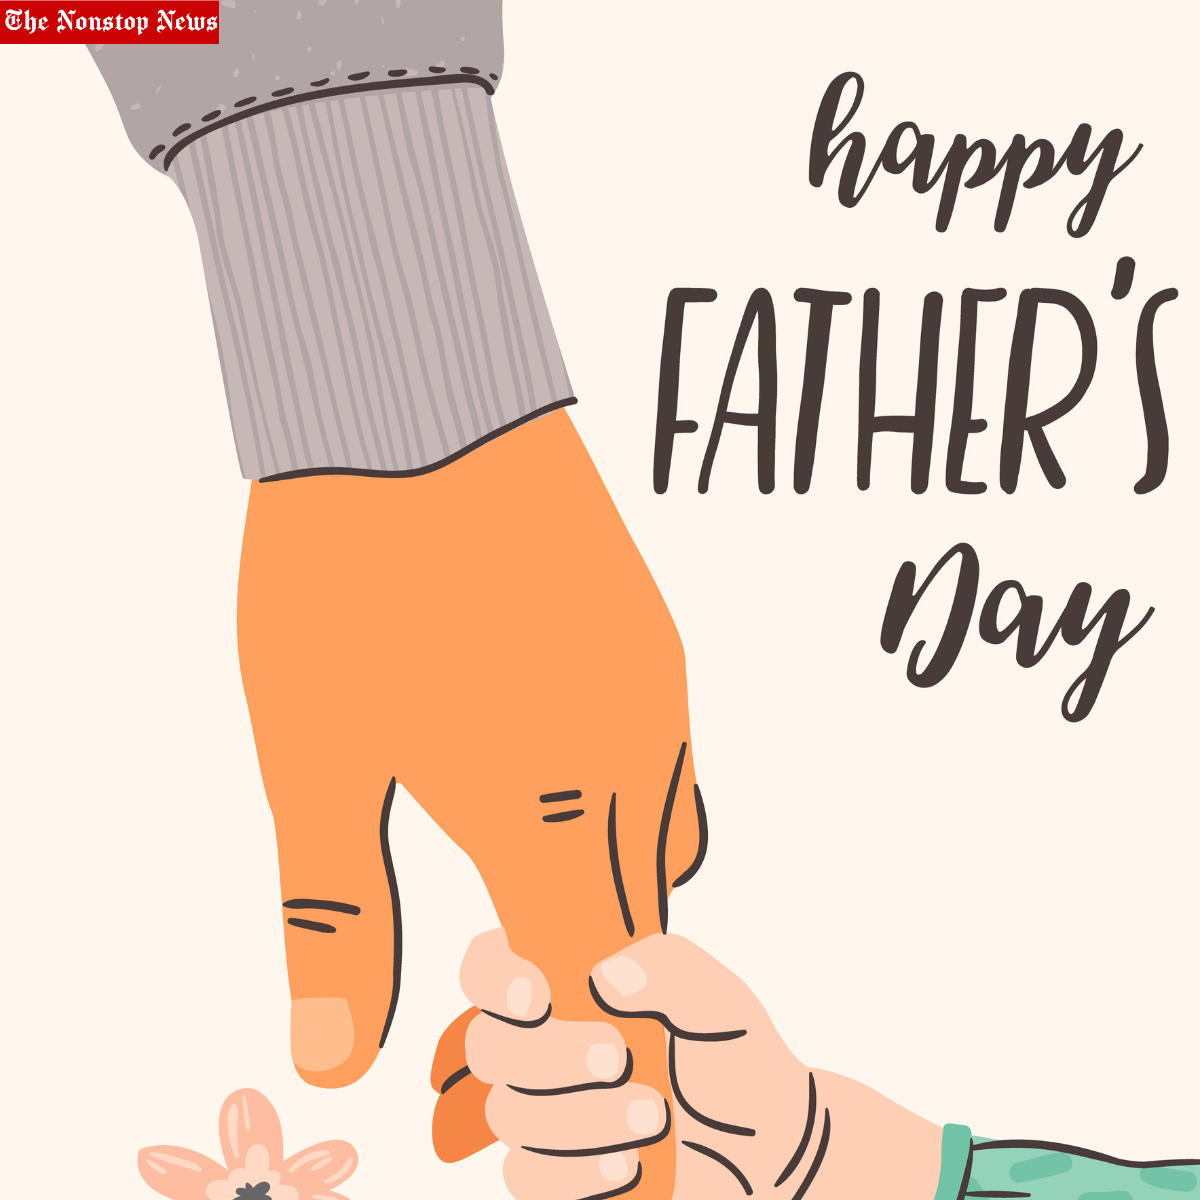 Fathers' Day 2022: Best Instagram Captions, Facebook Status, WhatsApp Greetings, Twitter Quotes to Share